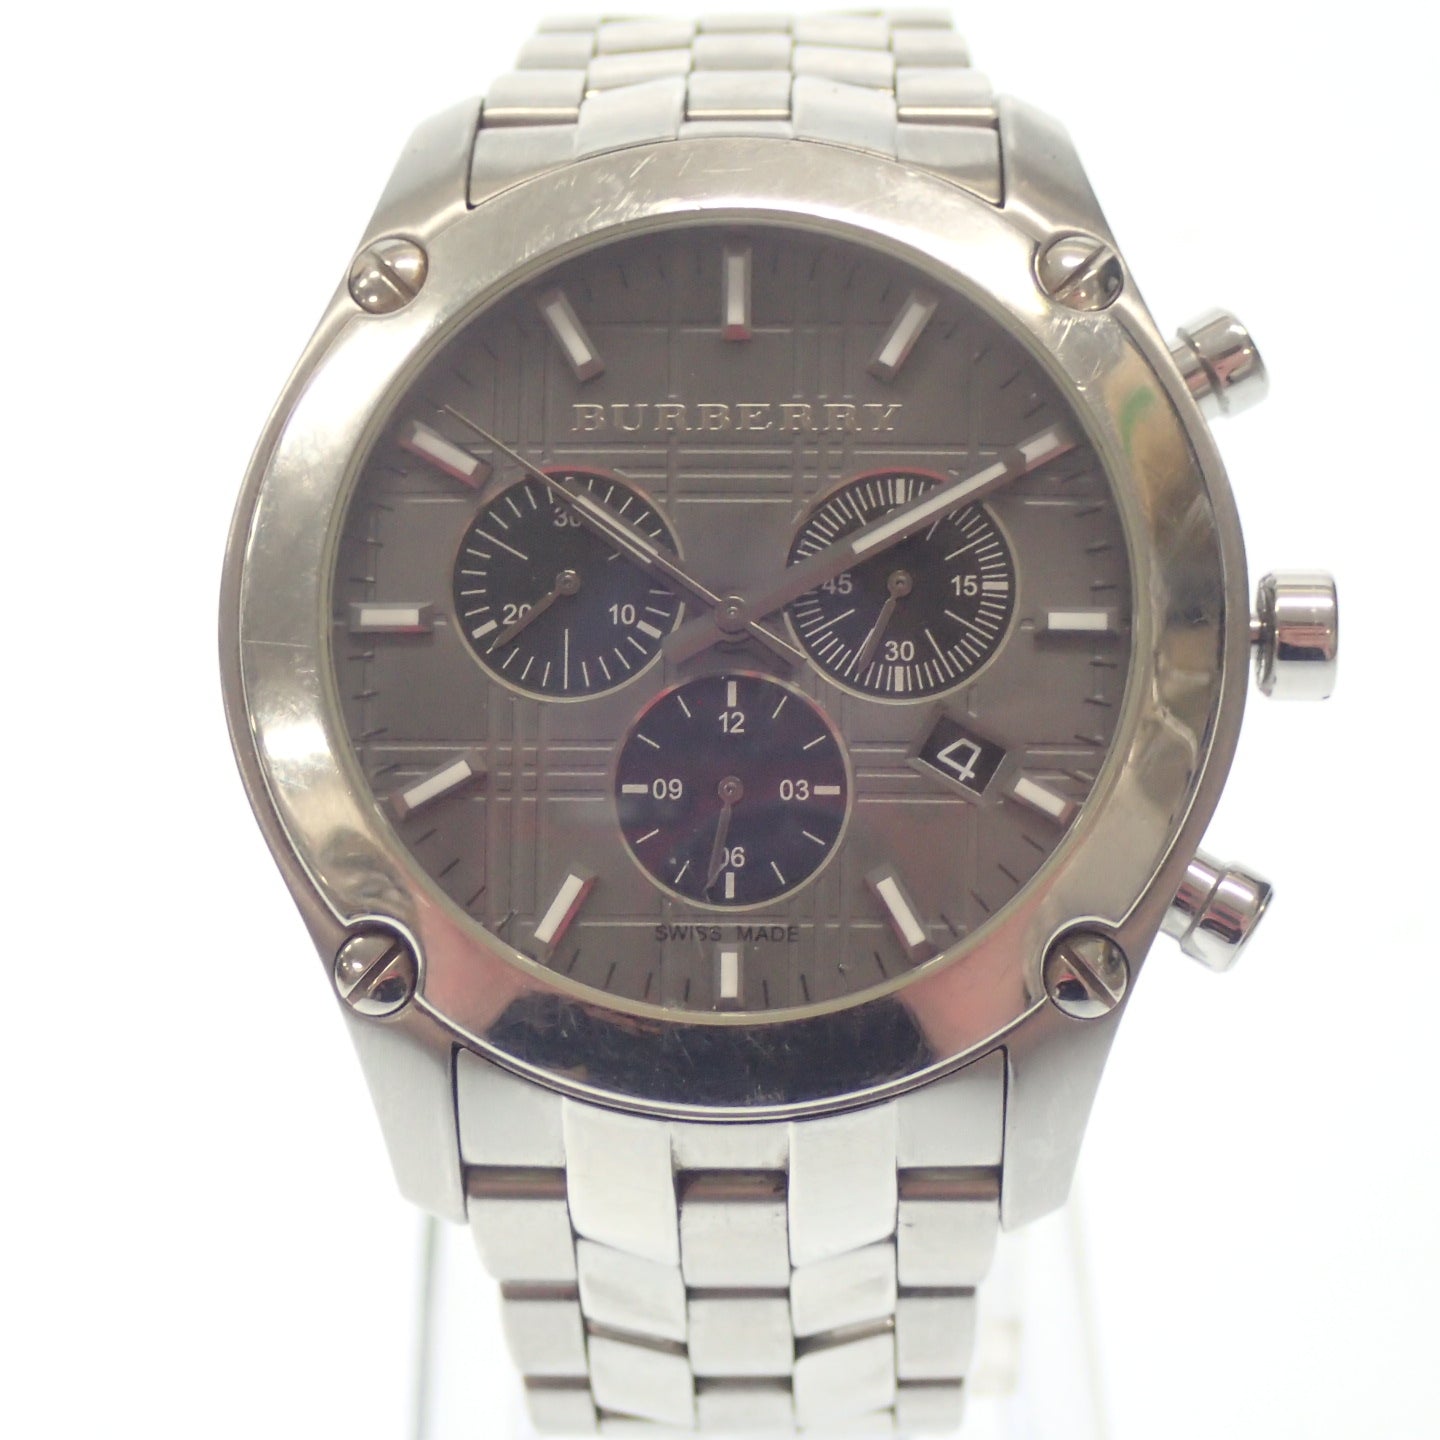 Burberry Watch New Heritage Chronograph Quartz Silver Dial Gray BU1850 with box BURBERRY [AFI19] [Used] 